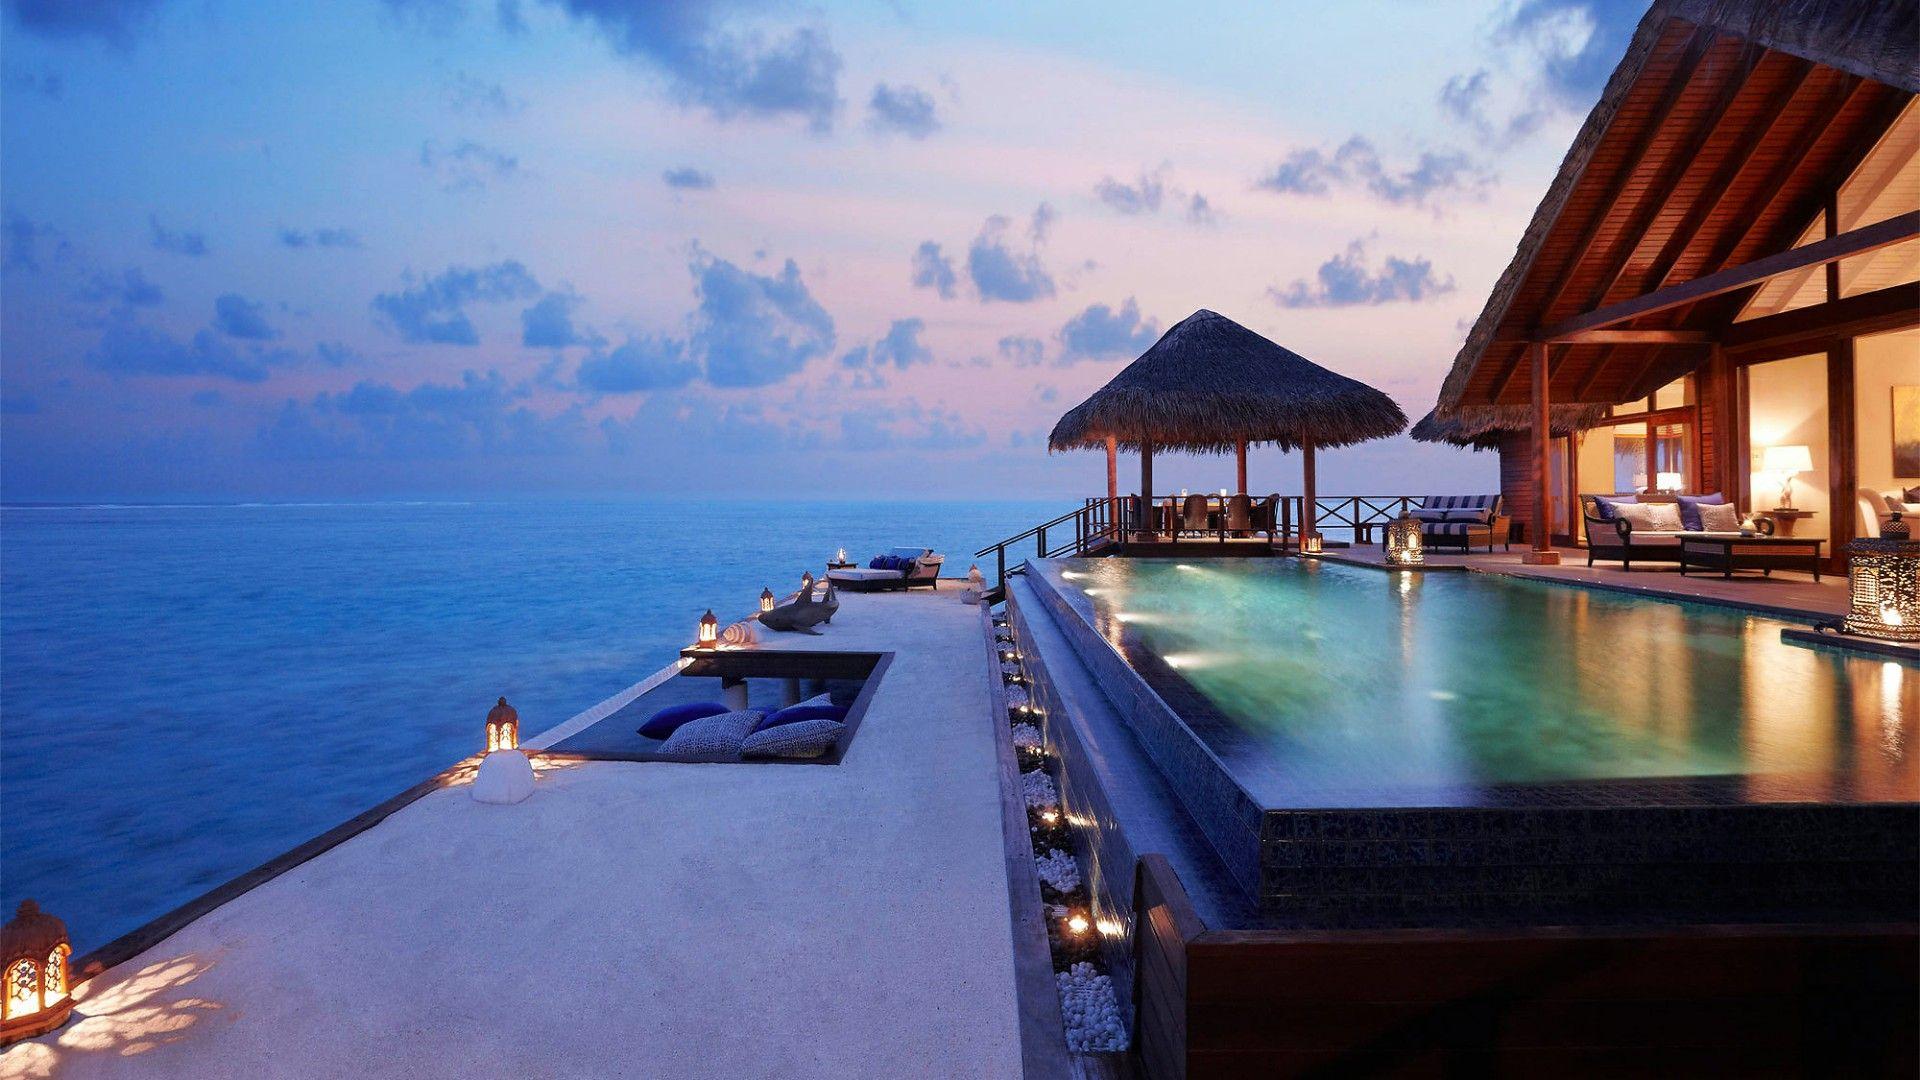 Exotic Maldives Summer Night With Stunning Views Of The Indian Ocean